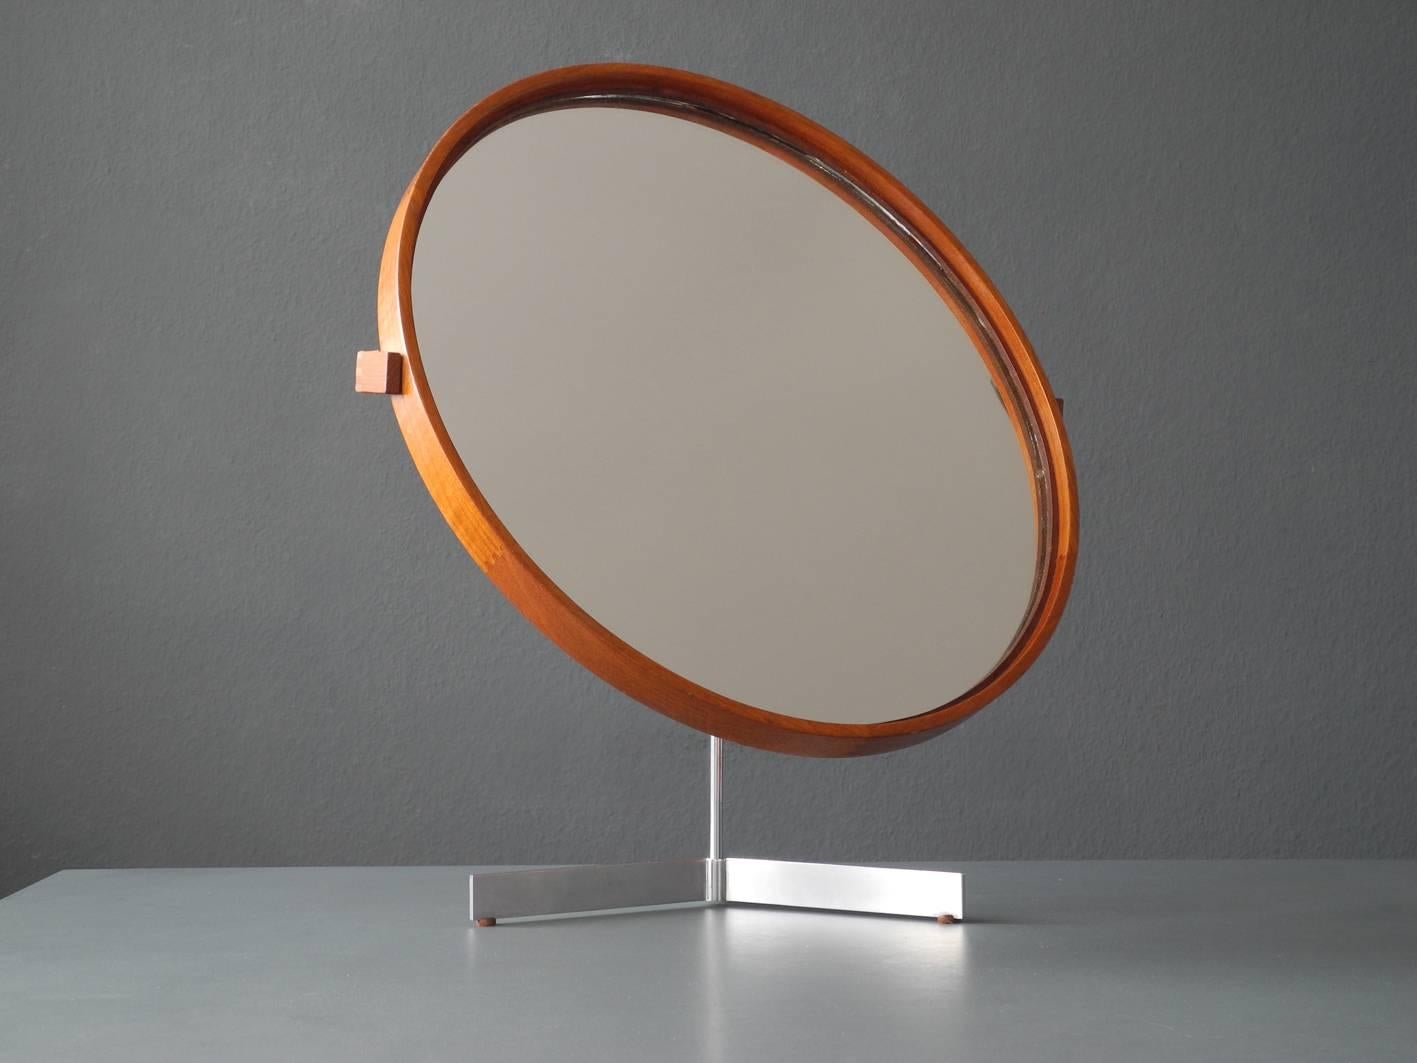 1960s beautiful original table vanity mirror of the brand Luxus Vittsjö Sweden with teak frame and a metal tripod foot. Mirror is rotatable in all directions and can be swivelled upwards. Made by Vittsjö Sweden. Designed by the brothers Uno & Östen